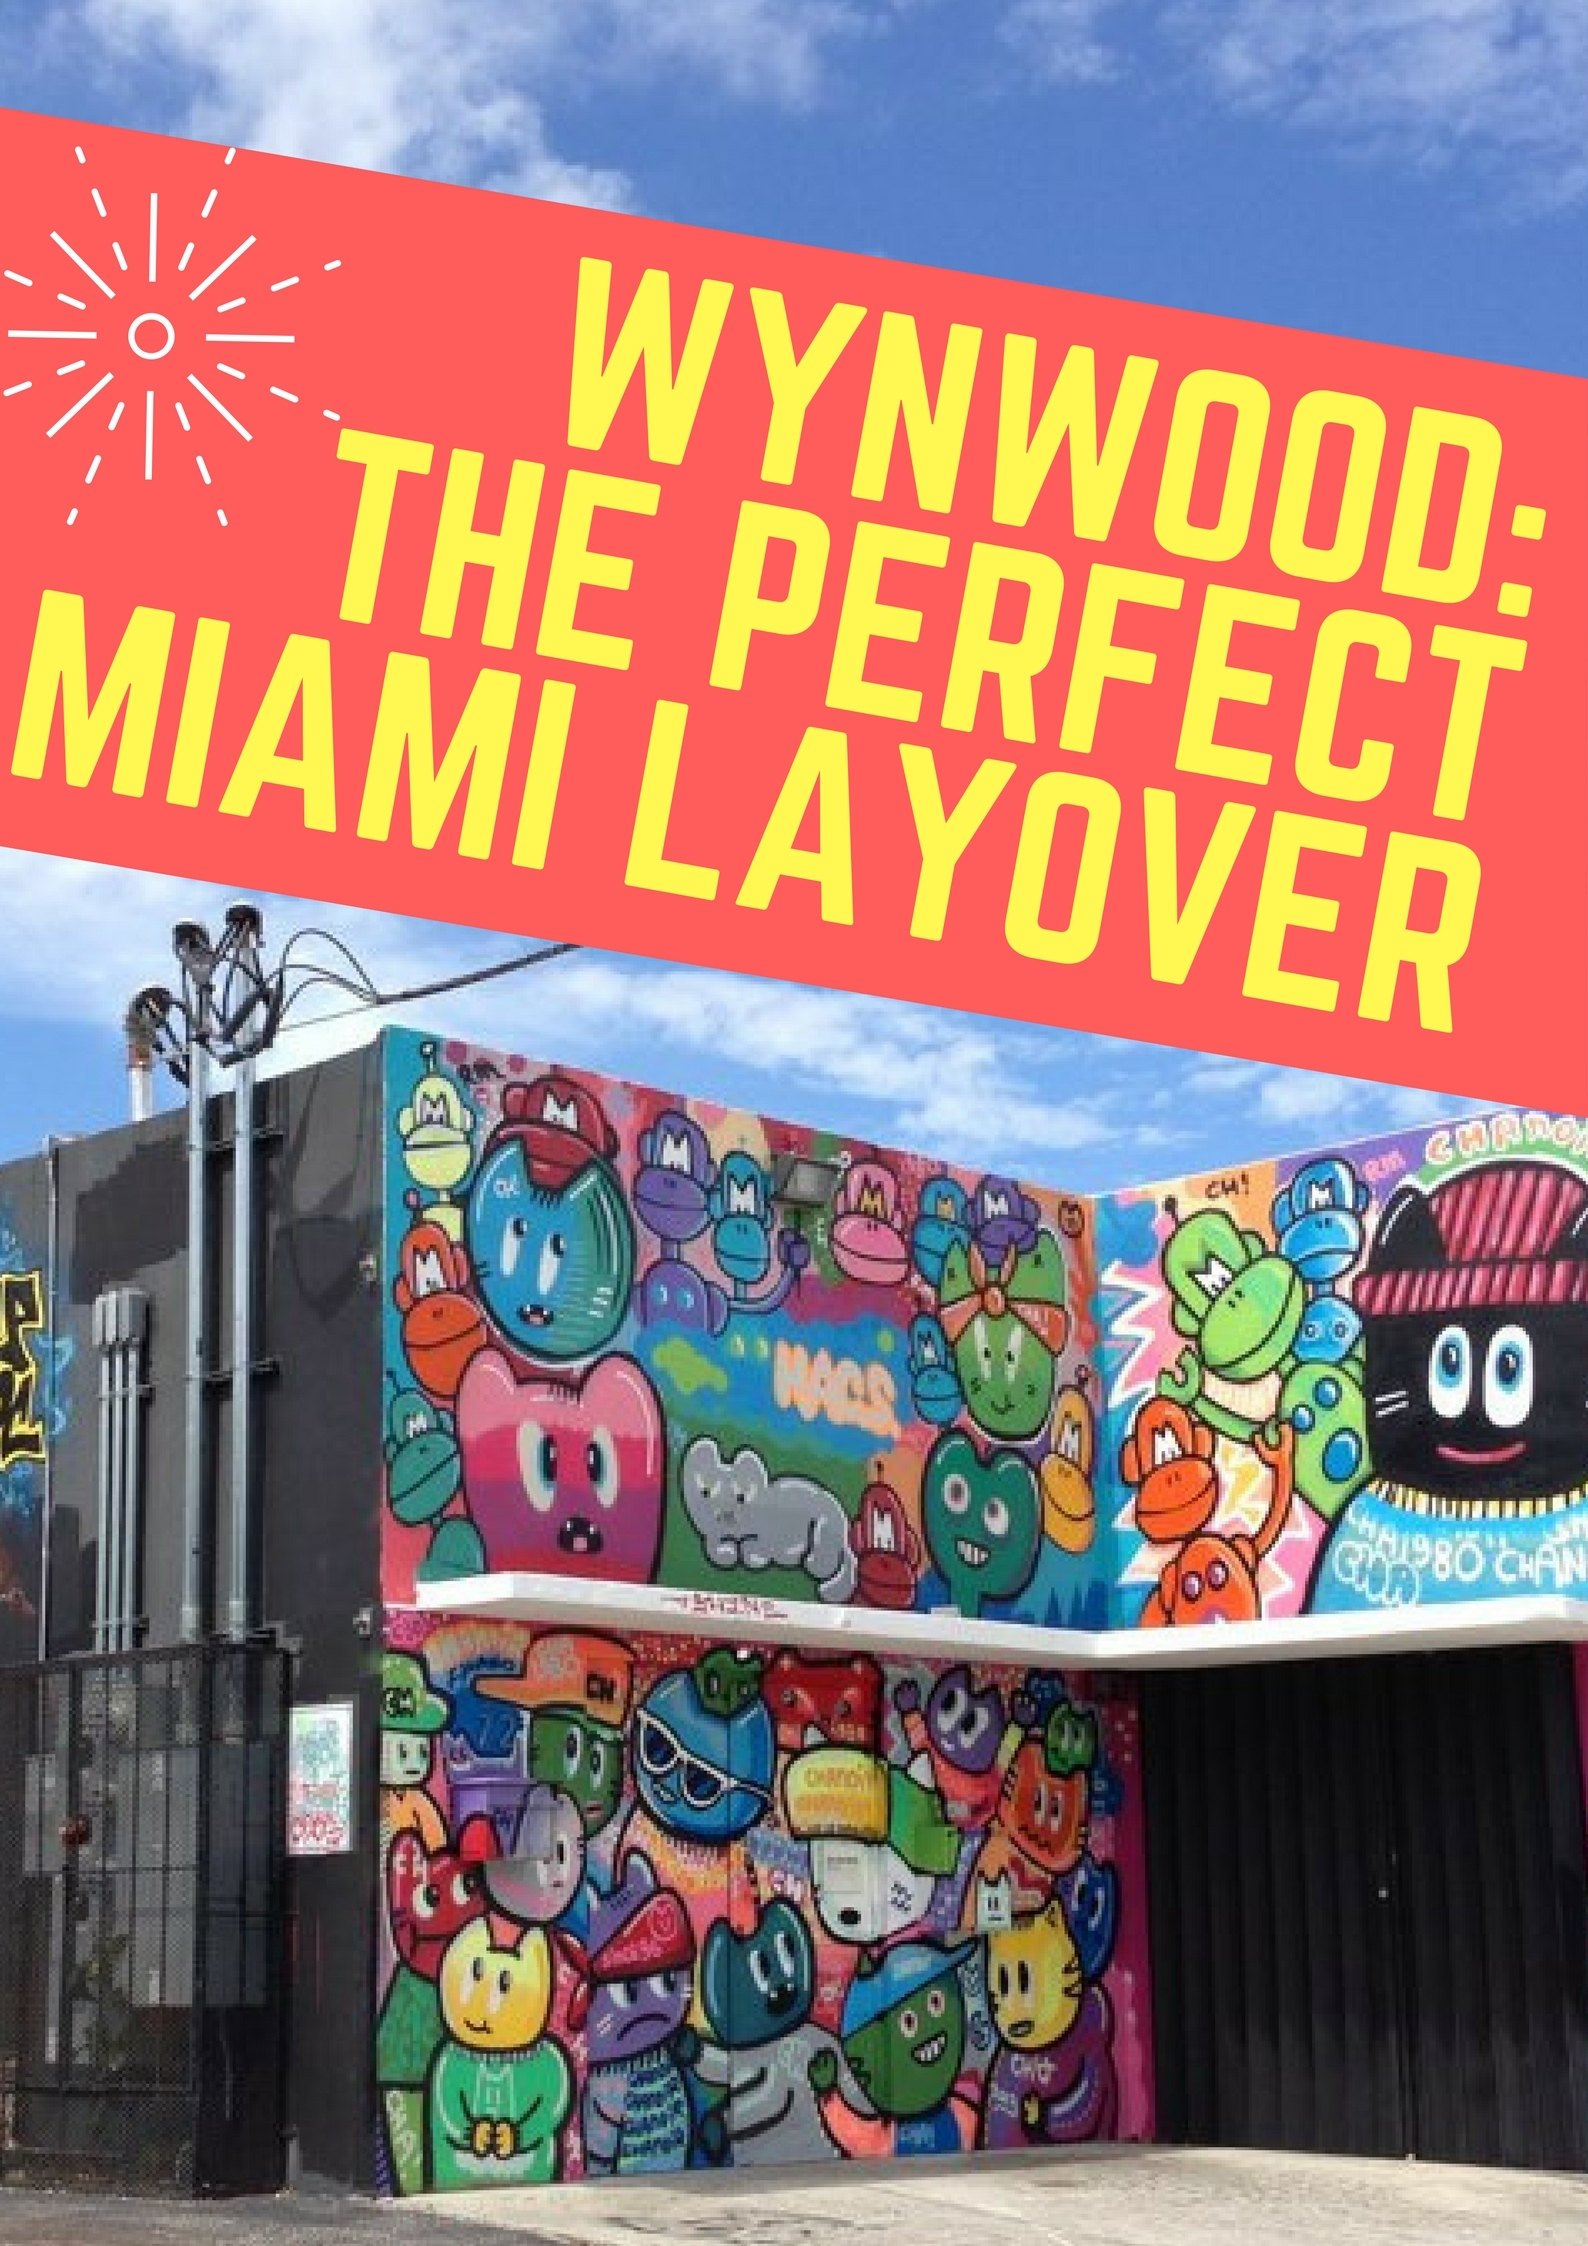 If you've got a long layover in Miami airport, heading to Wynwood for street art and exploration is the perfect way to spend a Miami layover.